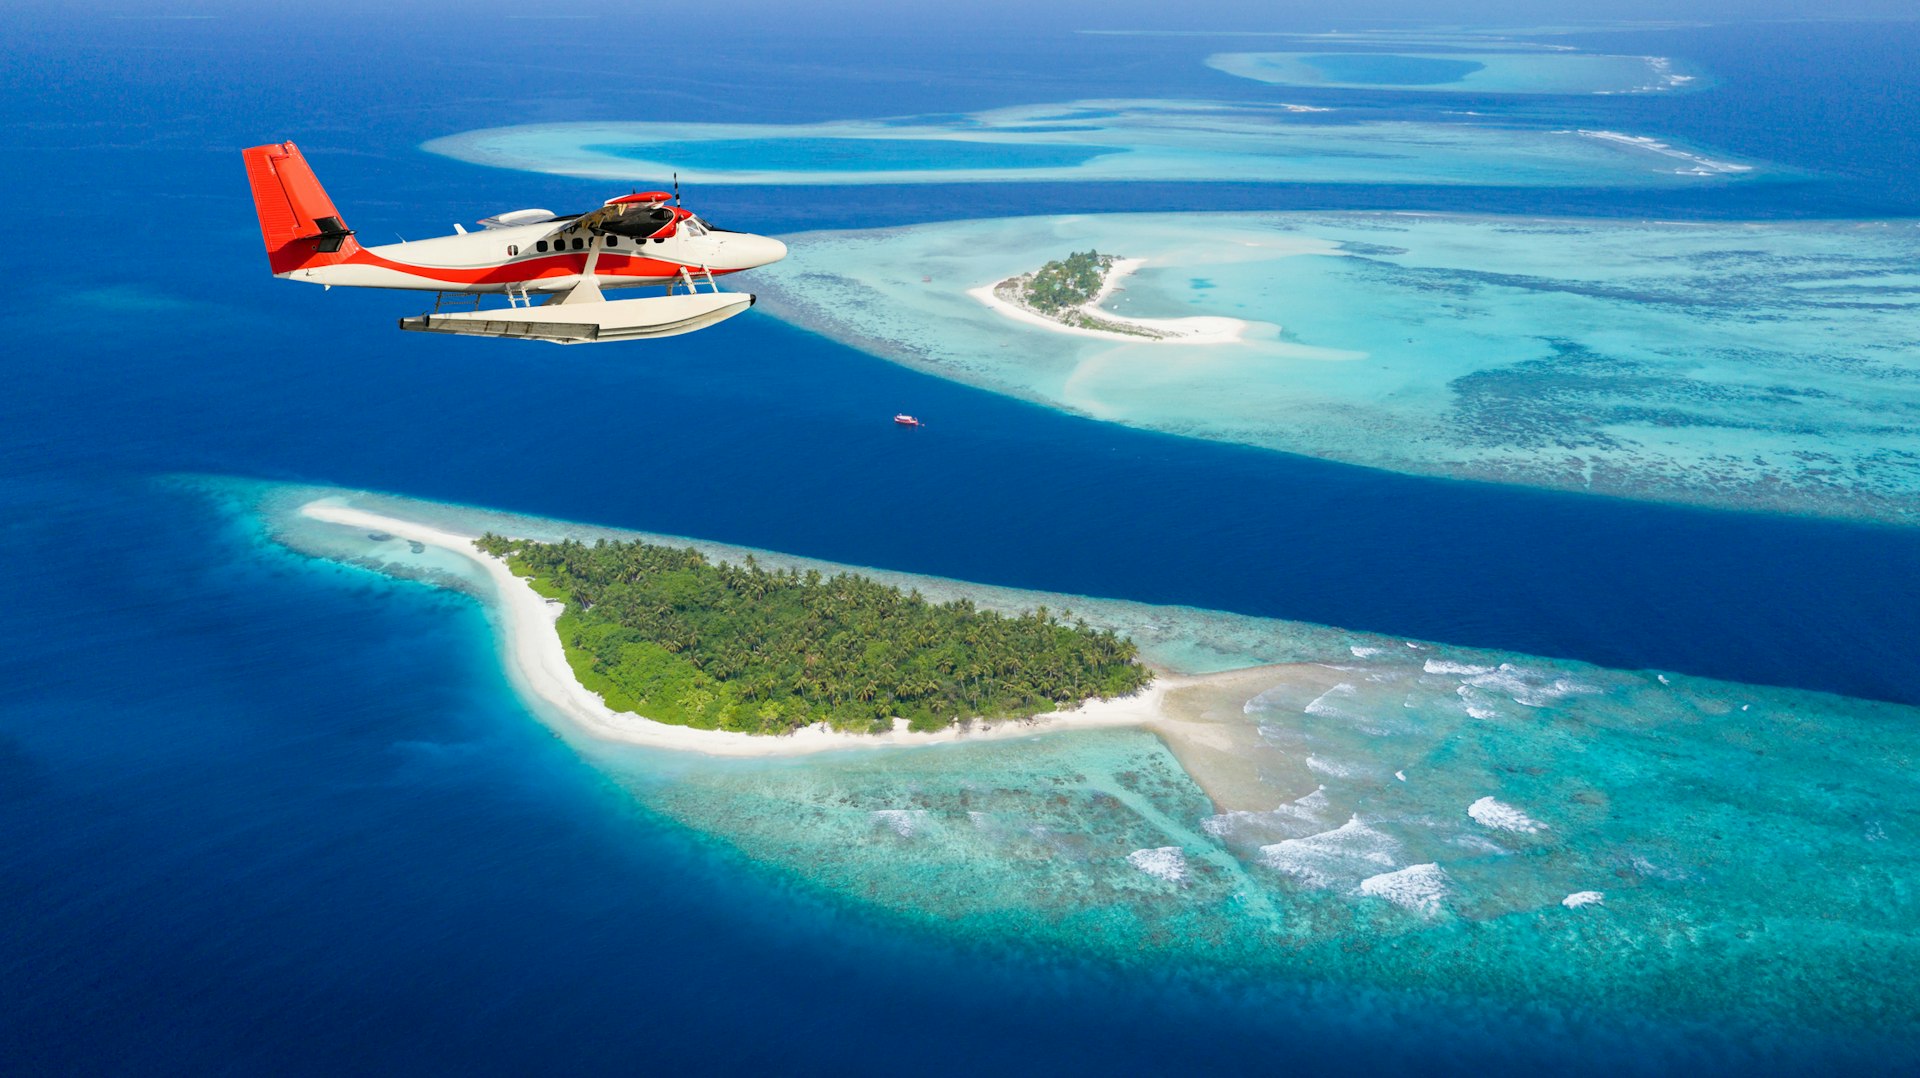 A seaplane glides through the sky above small islands and islets in the middle of a blue ocean